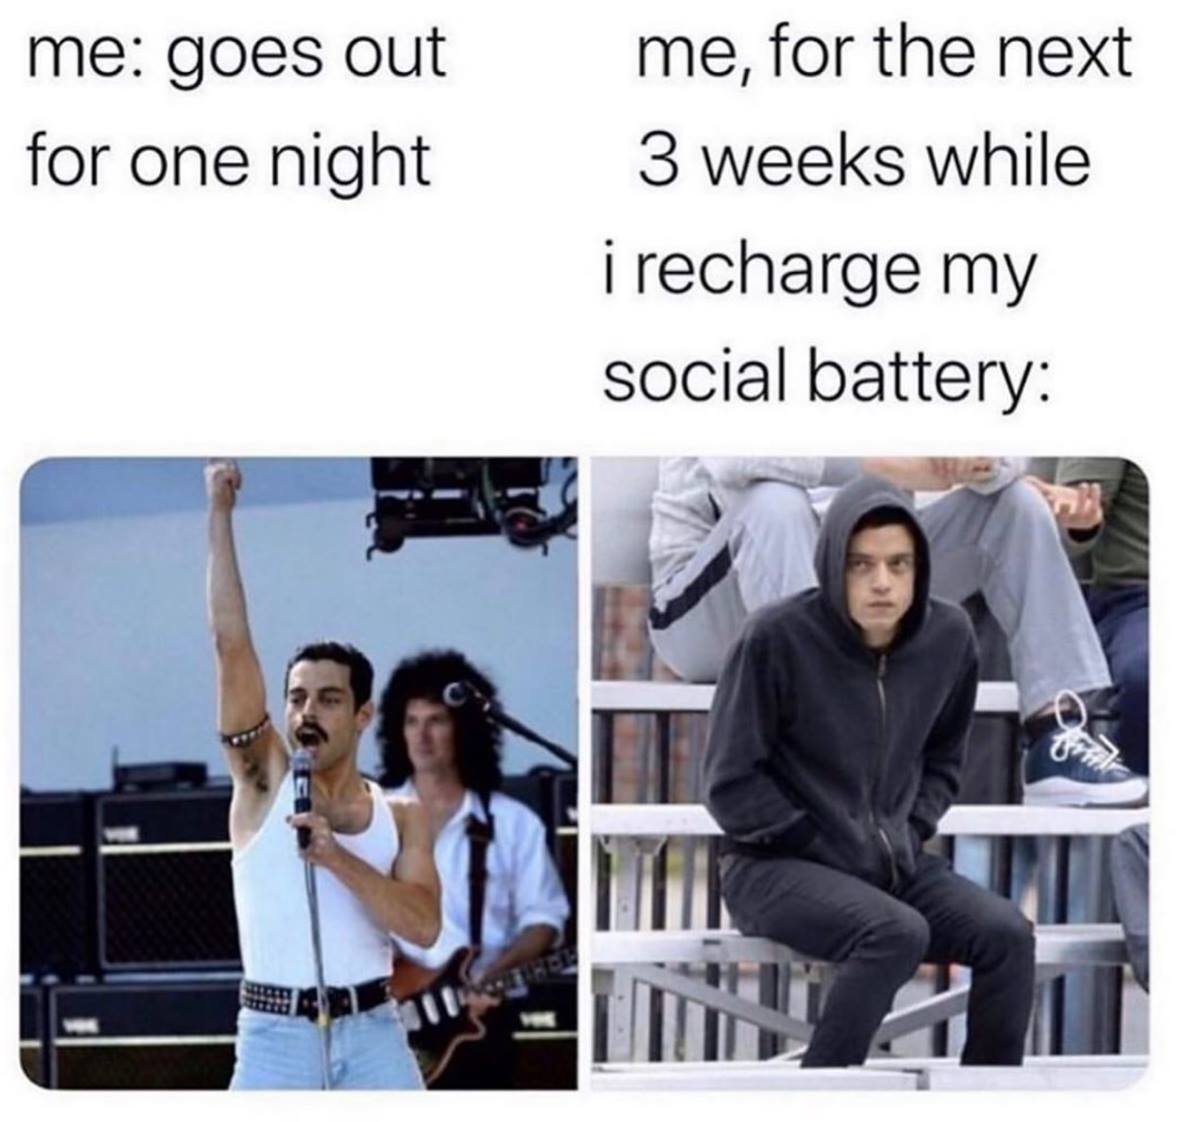 social anxiety memes - me goes out for one night me, for the next 3 weeks while i recharge my social battery